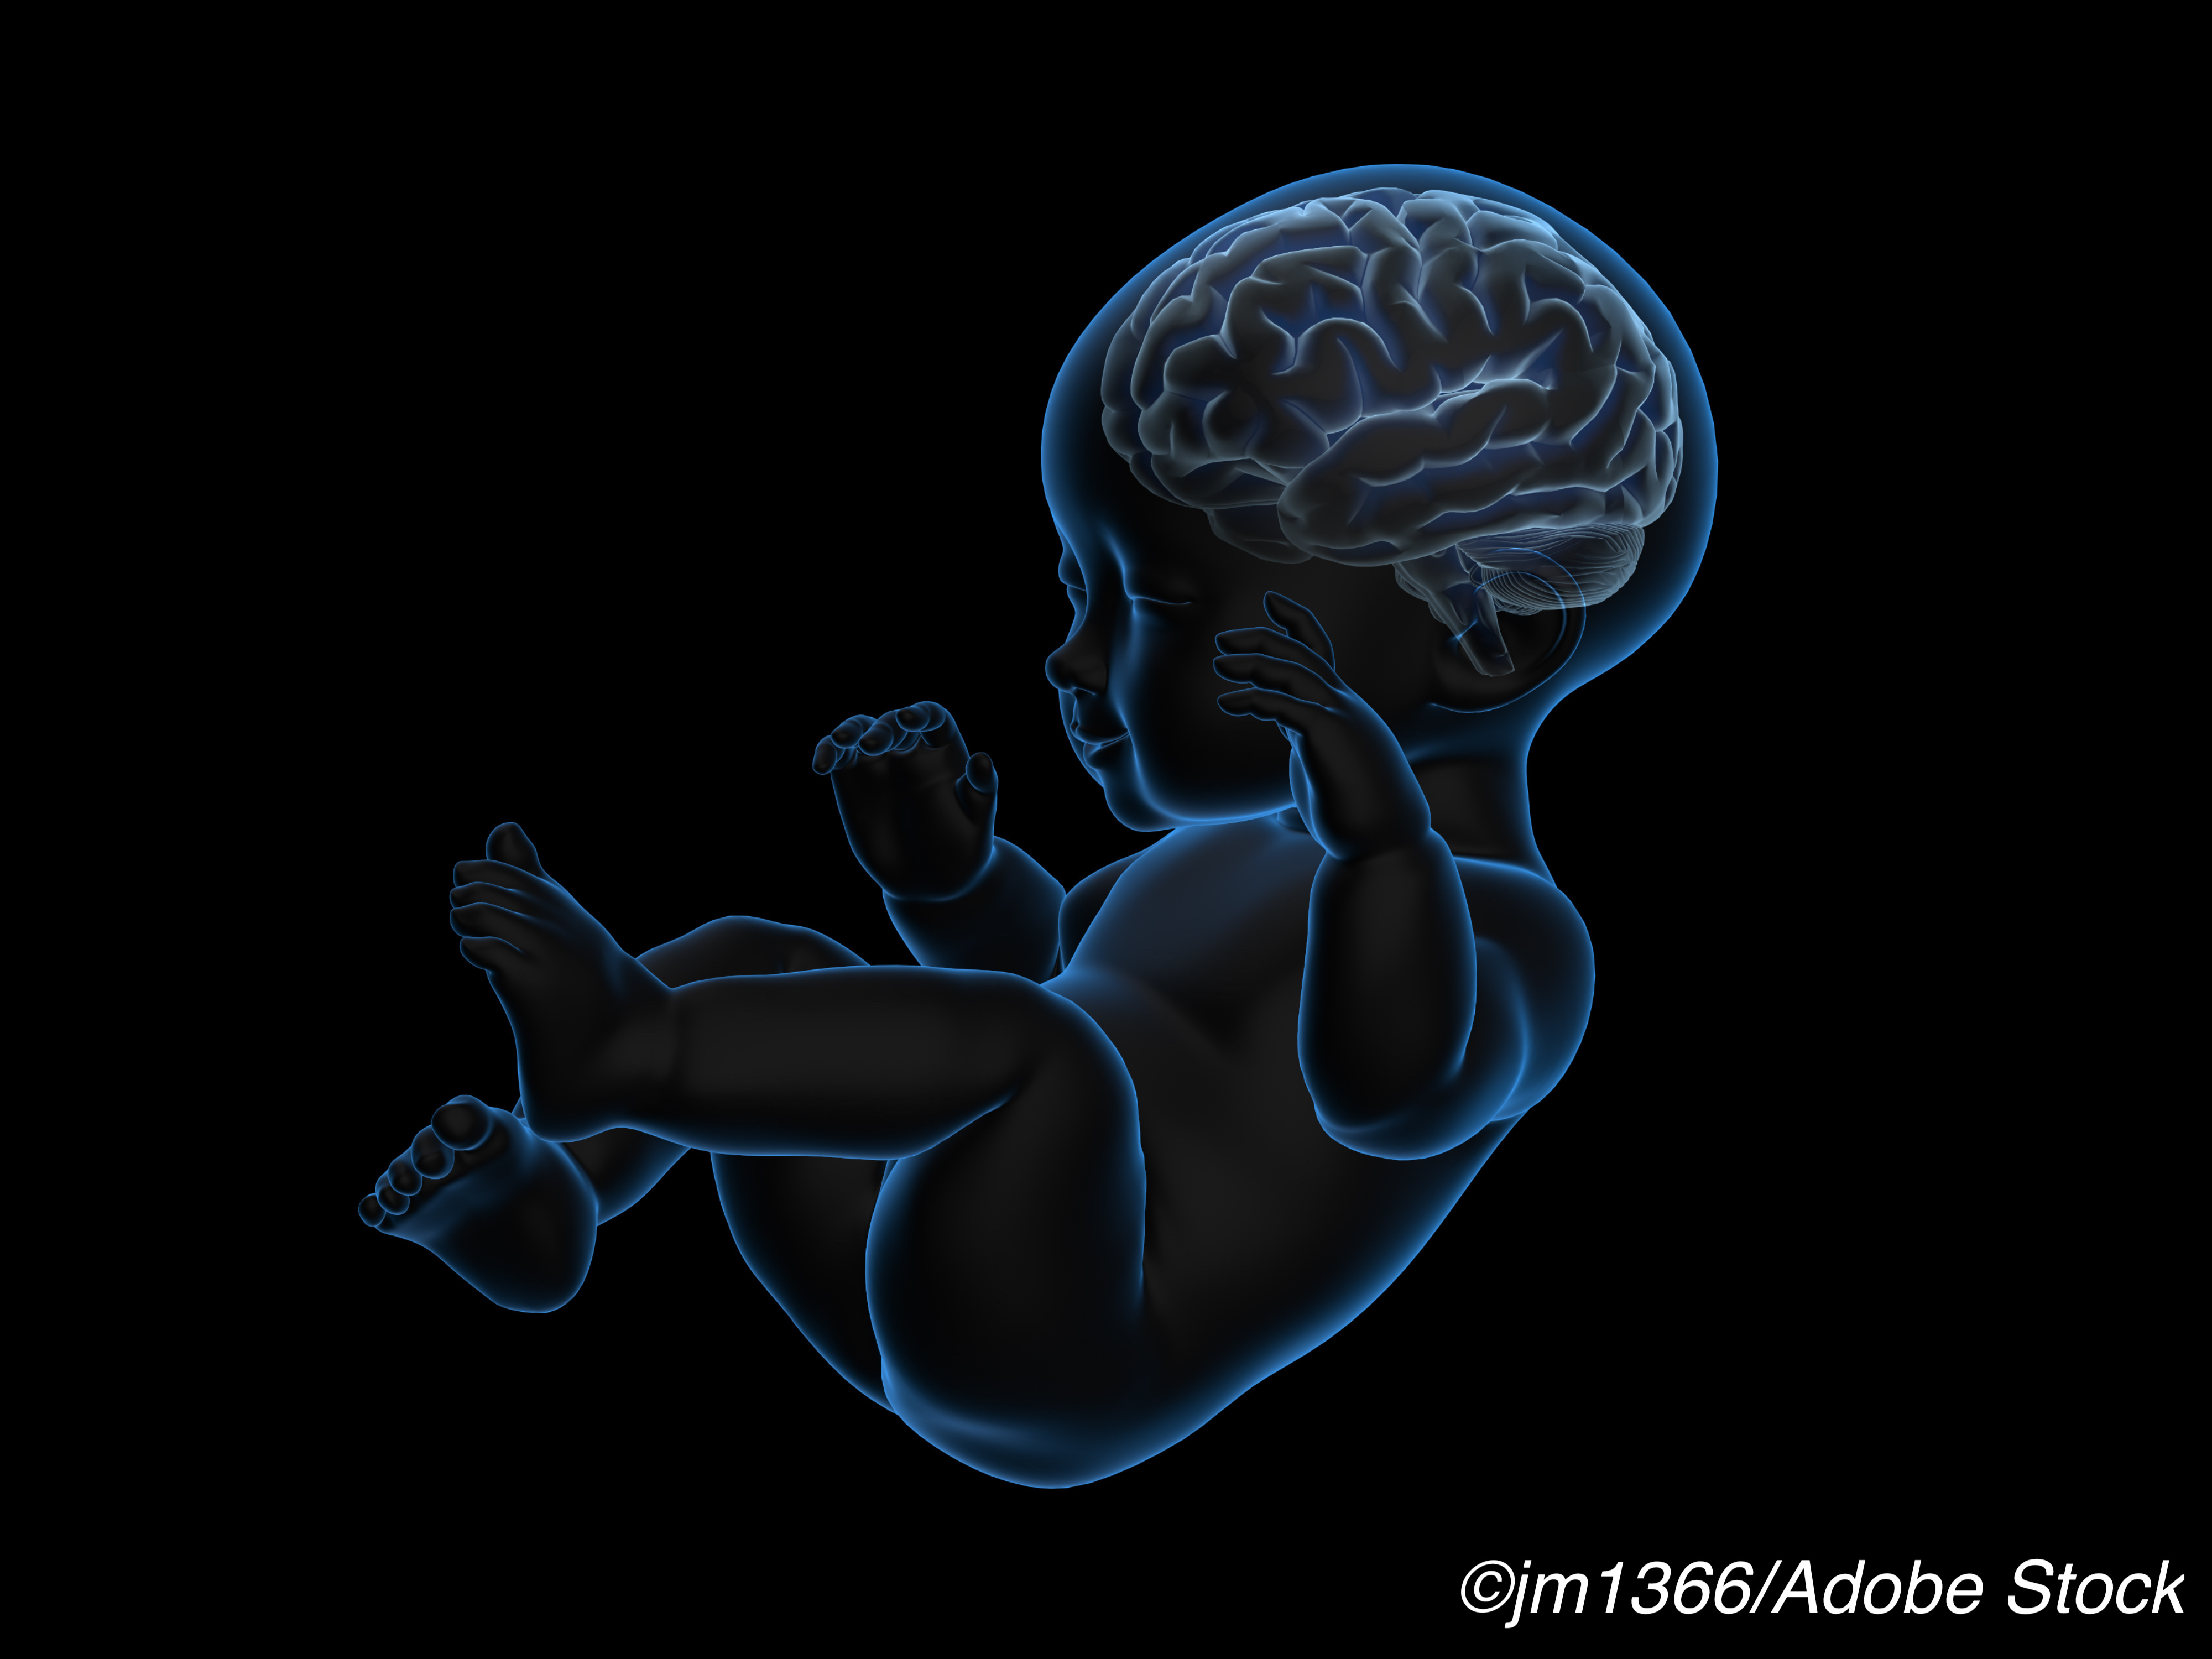 Infants with Zika with Normal Head Circumference Show Neurologic Abnormalities